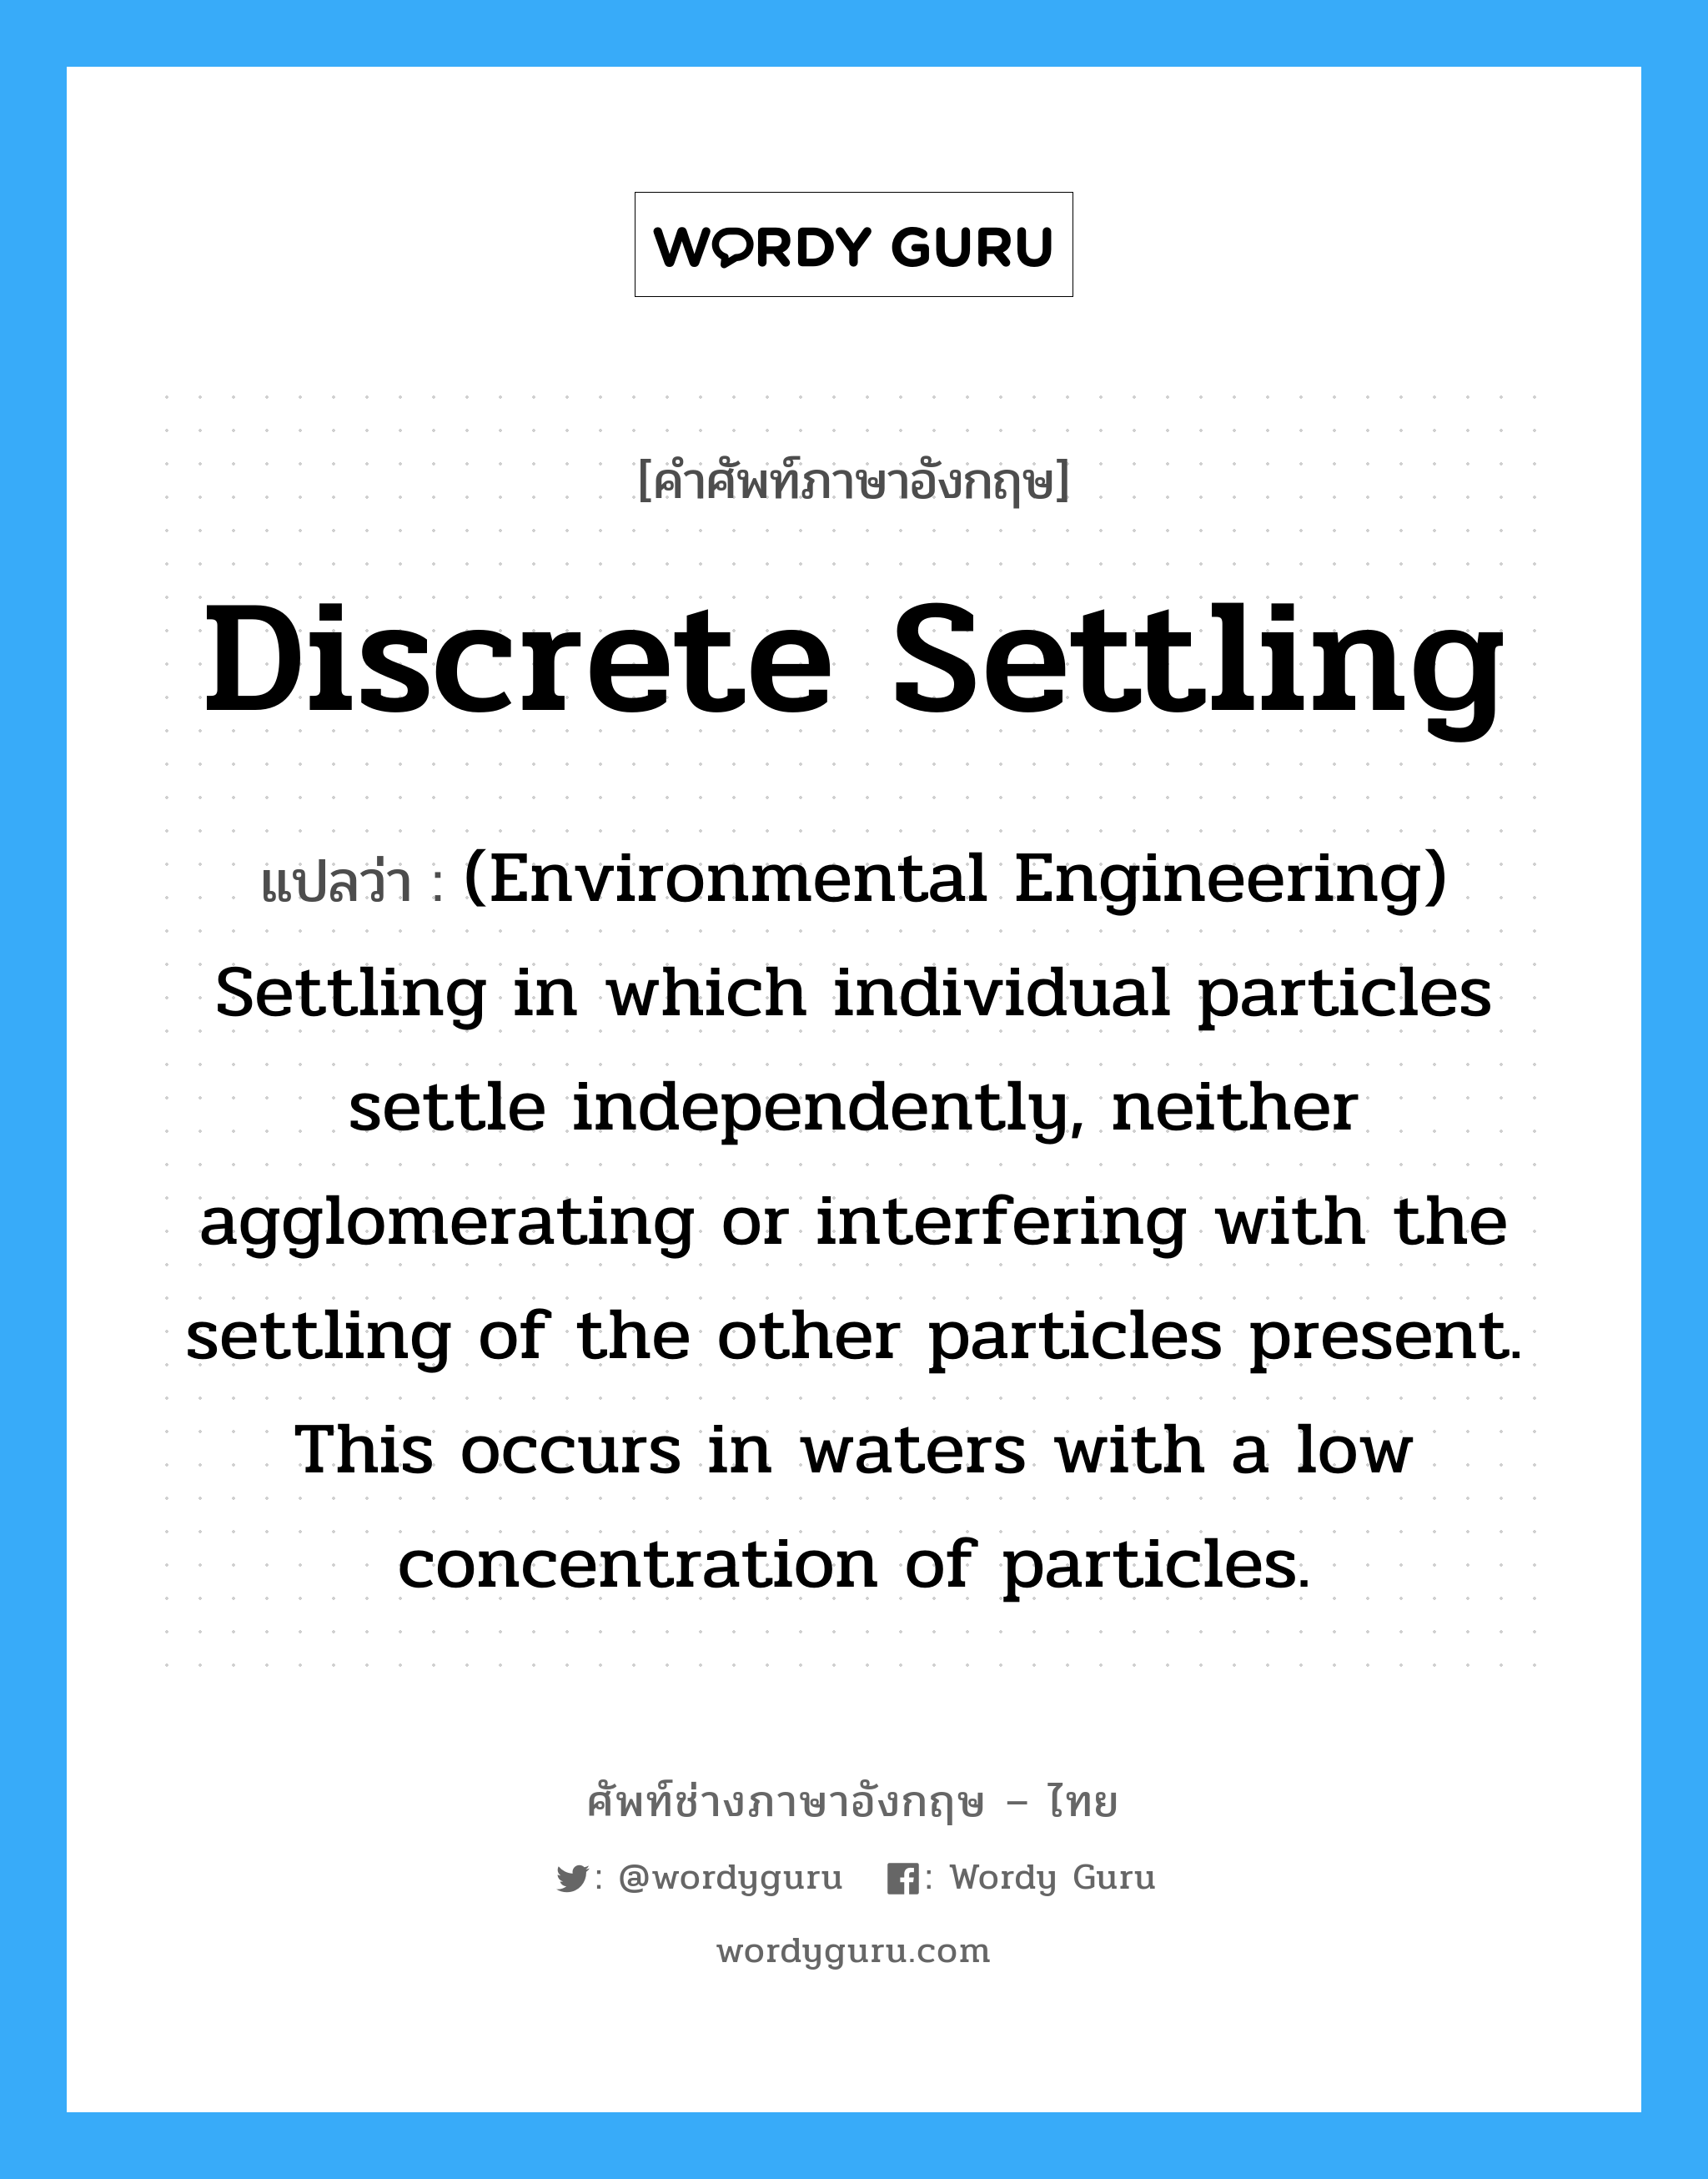 Discrete settling แปลว่า?, คำศัพท์ช่างภาษาอังกฤษ - ไทย Discrete settling คำศัพท์ภาษาอังกฤษ Discrete settling แปลว่า (Environmental Engineering) Settling in which individual particles settle independently, neither agglomerating or interfering with the settling of the other particles present. This occurs in waters with a low concentration of particles.